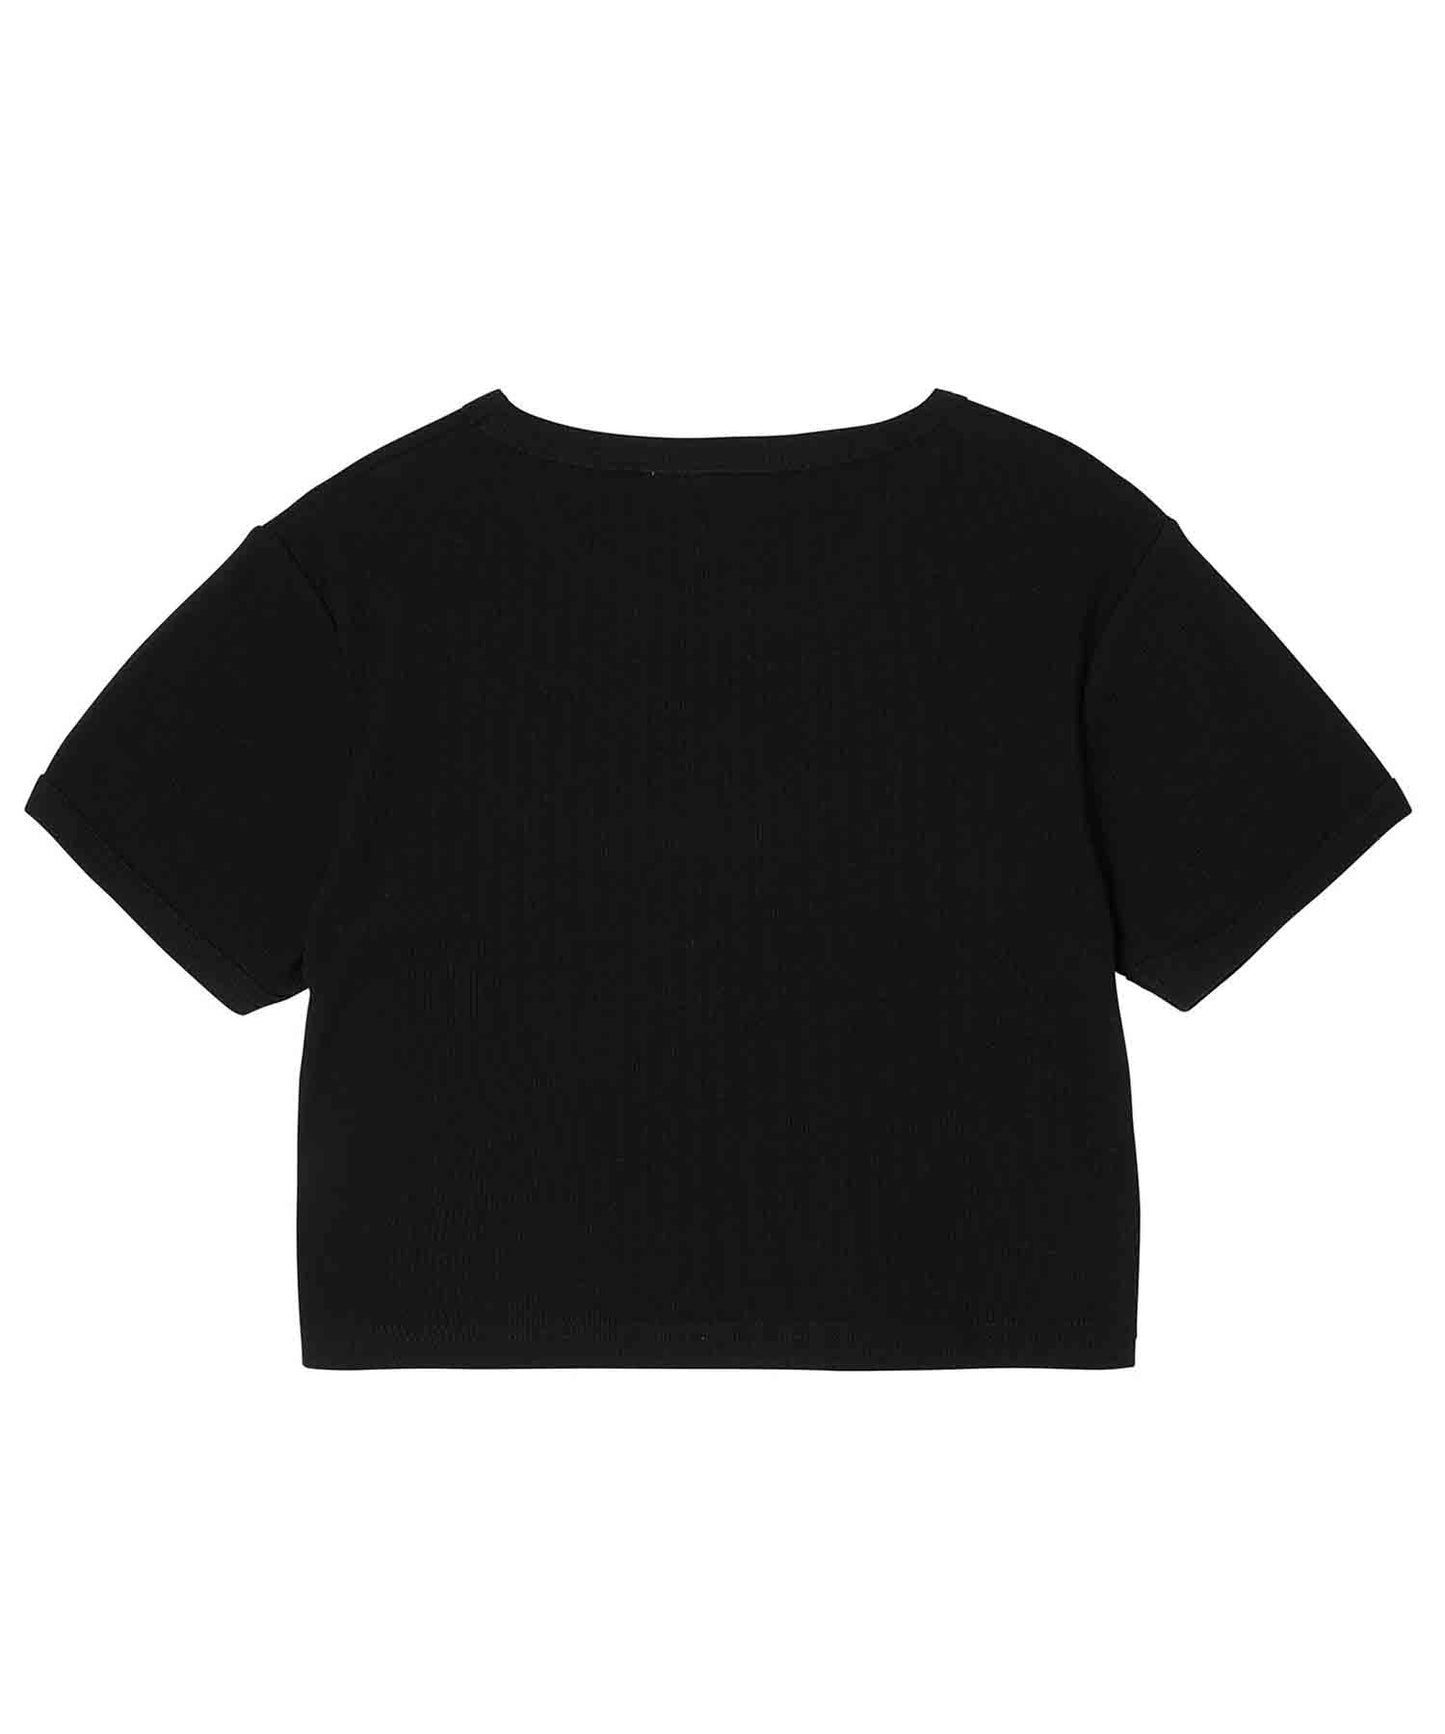 MILLS LOGO S/S CROPPED TOP